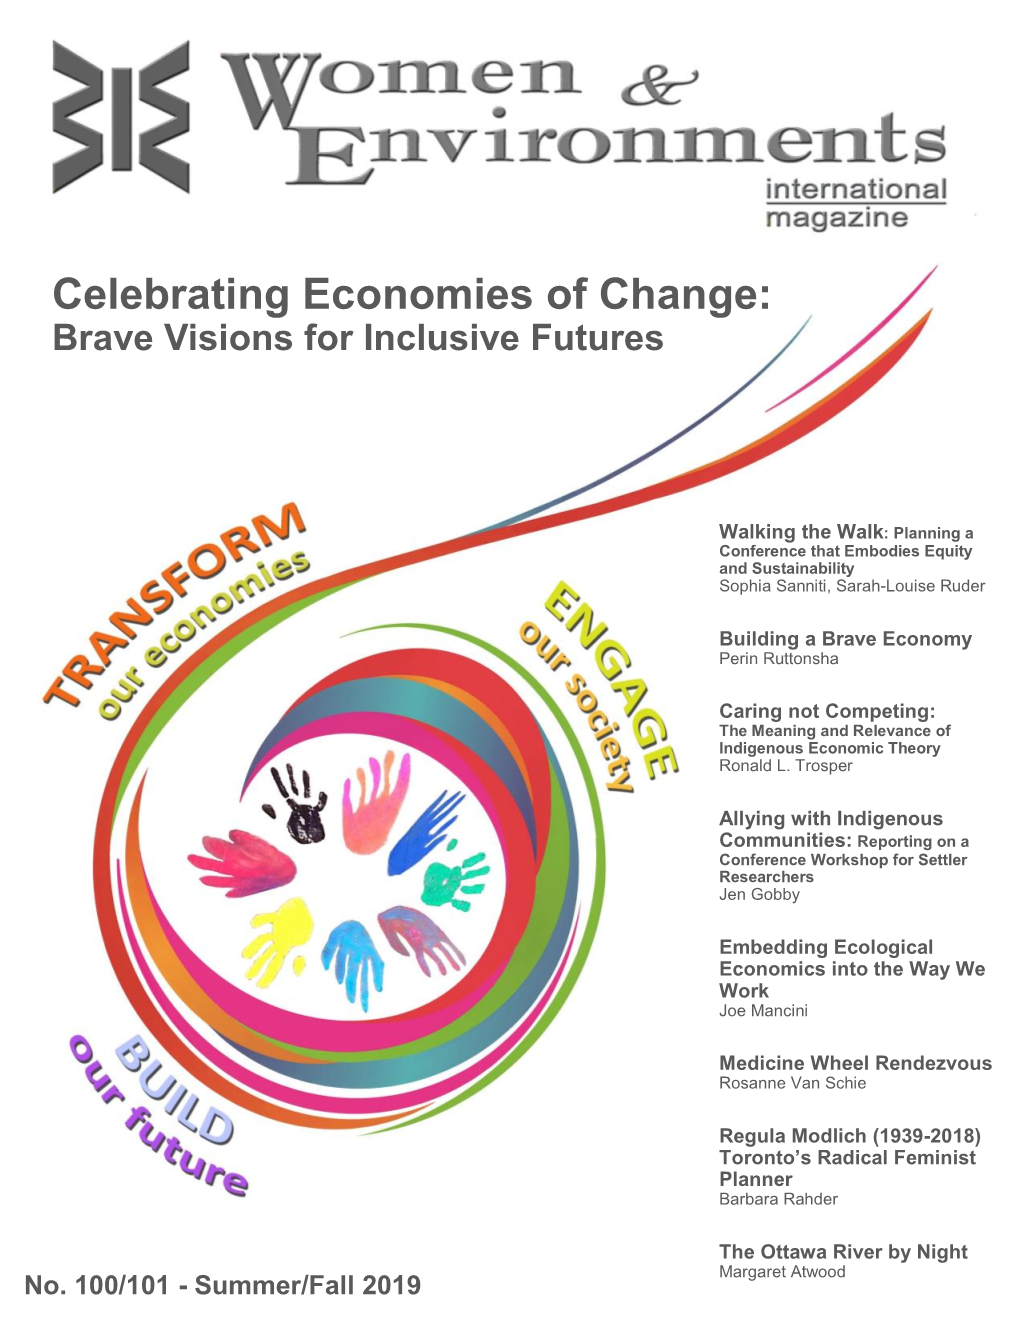 Celebrating Economies of Change: Brave Visions for Inclusive Futures